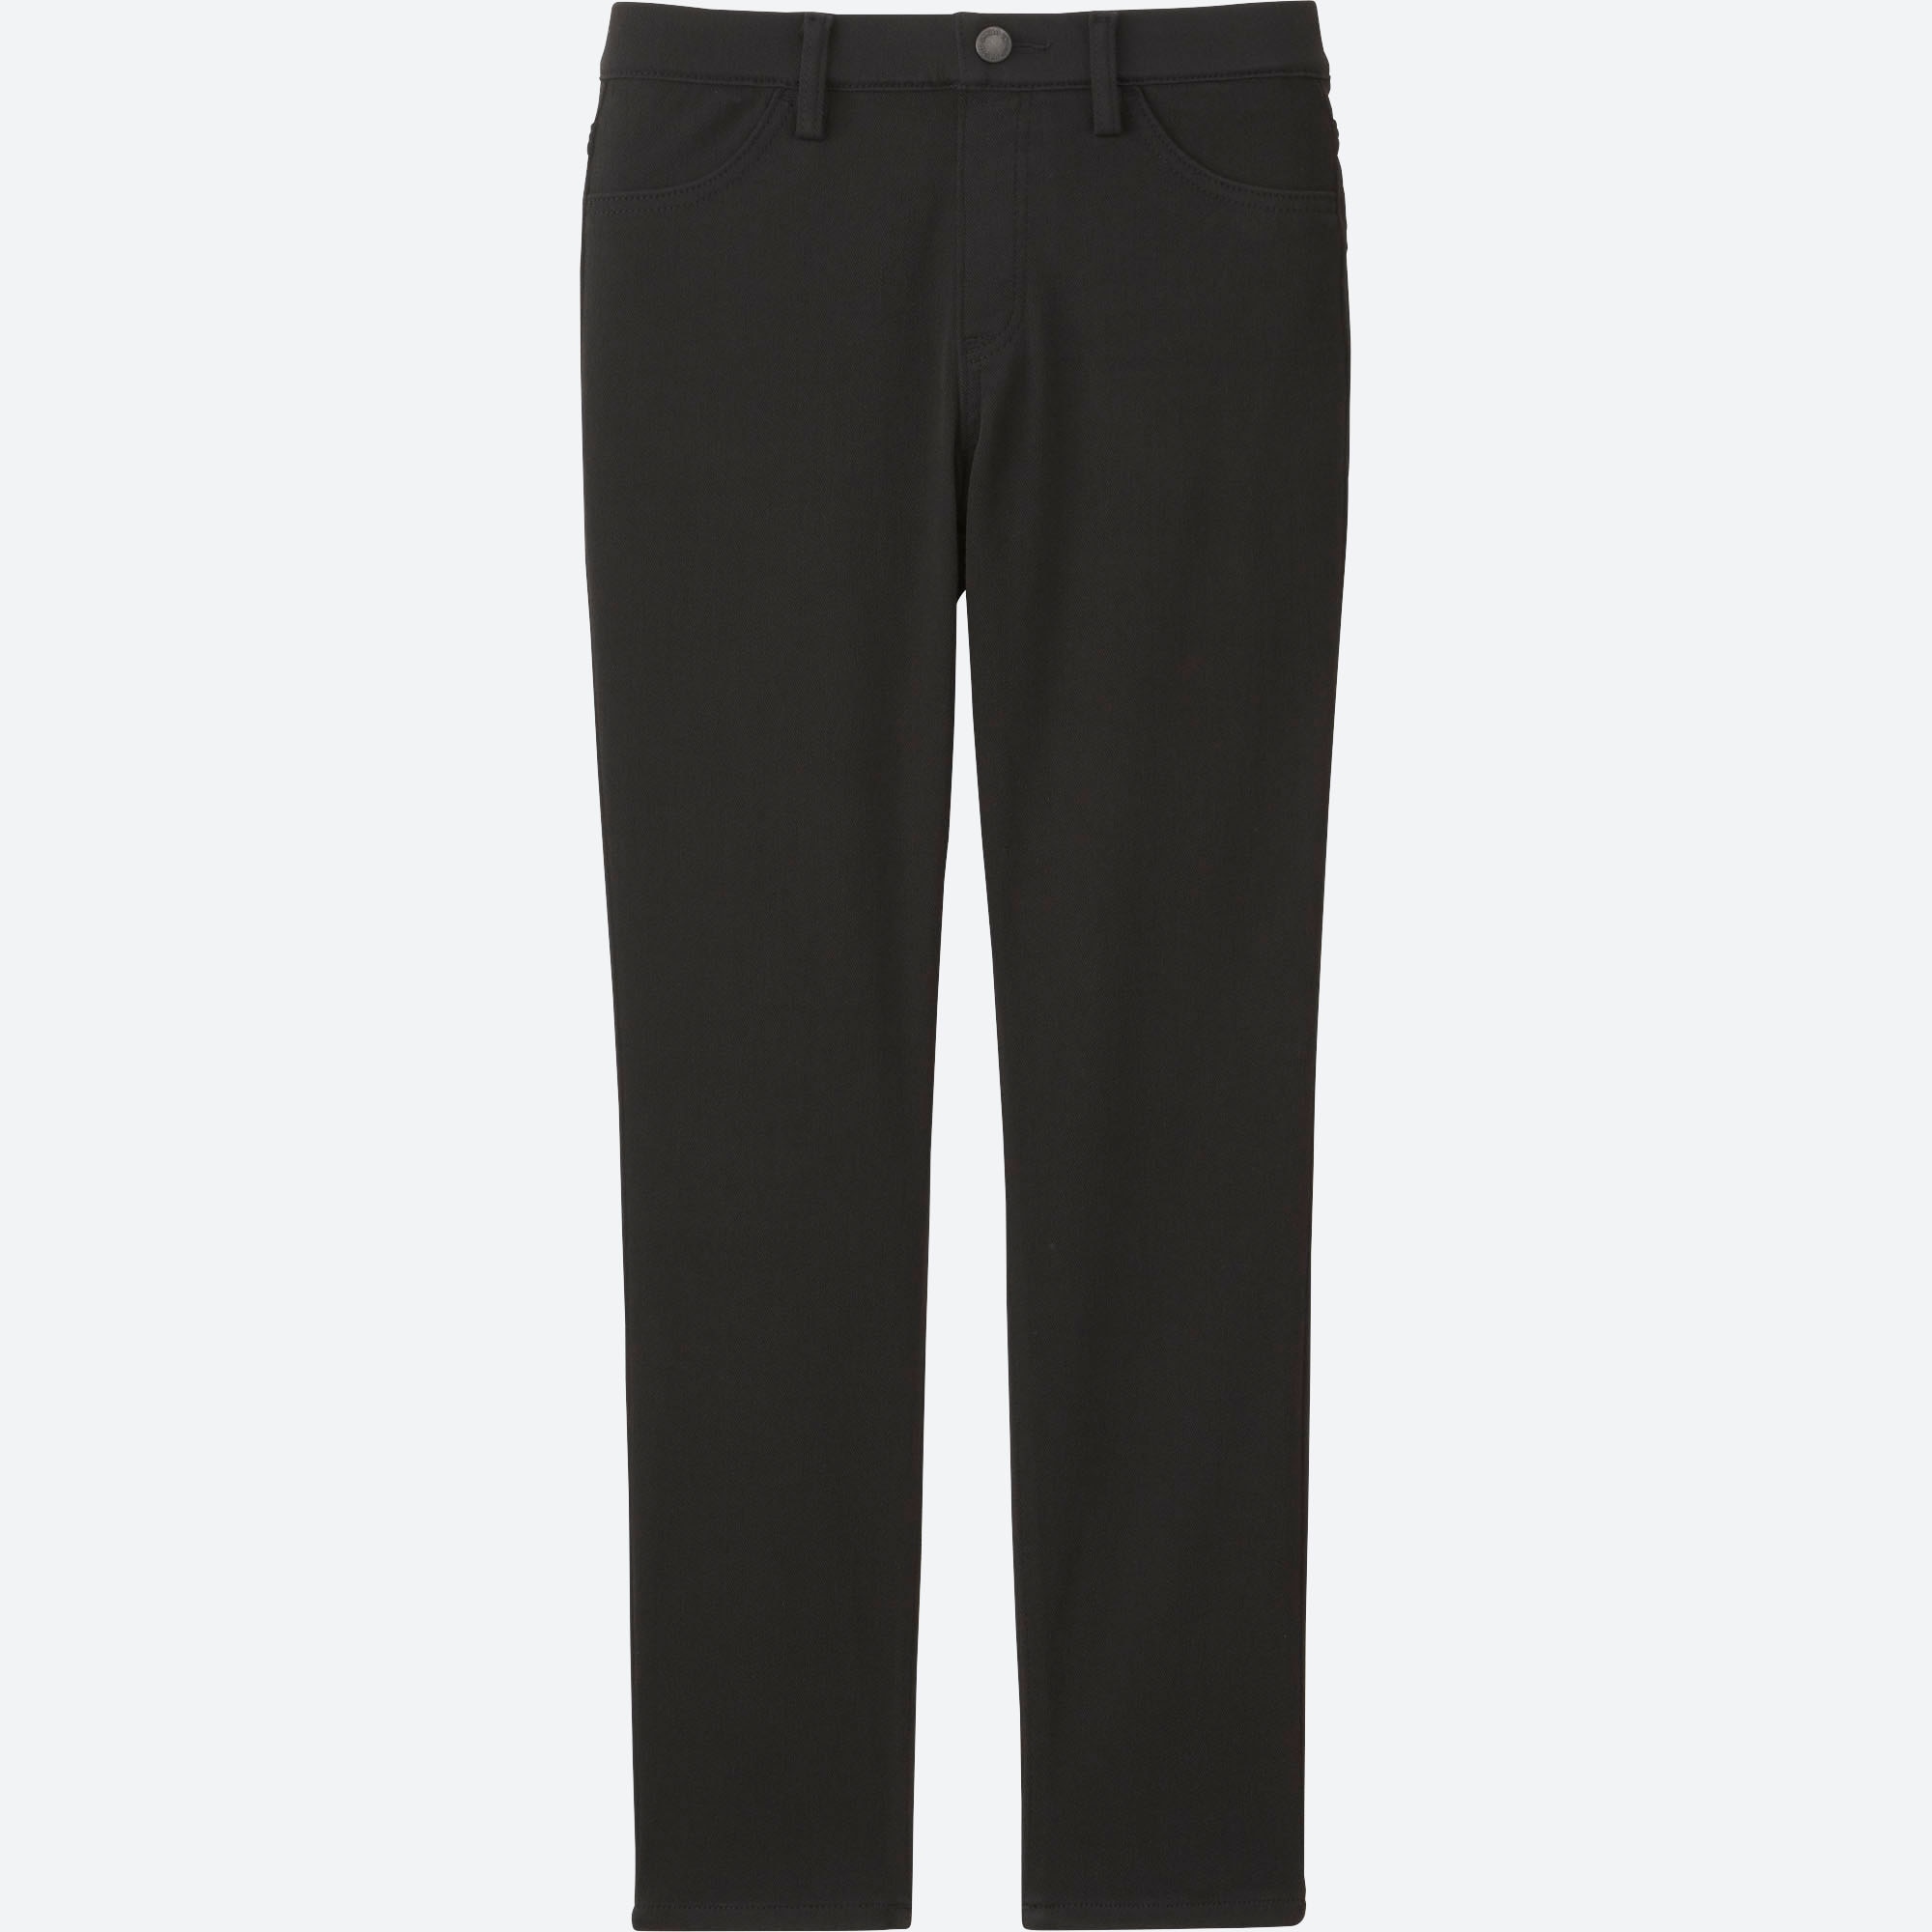 uniqlo cropped jeggings